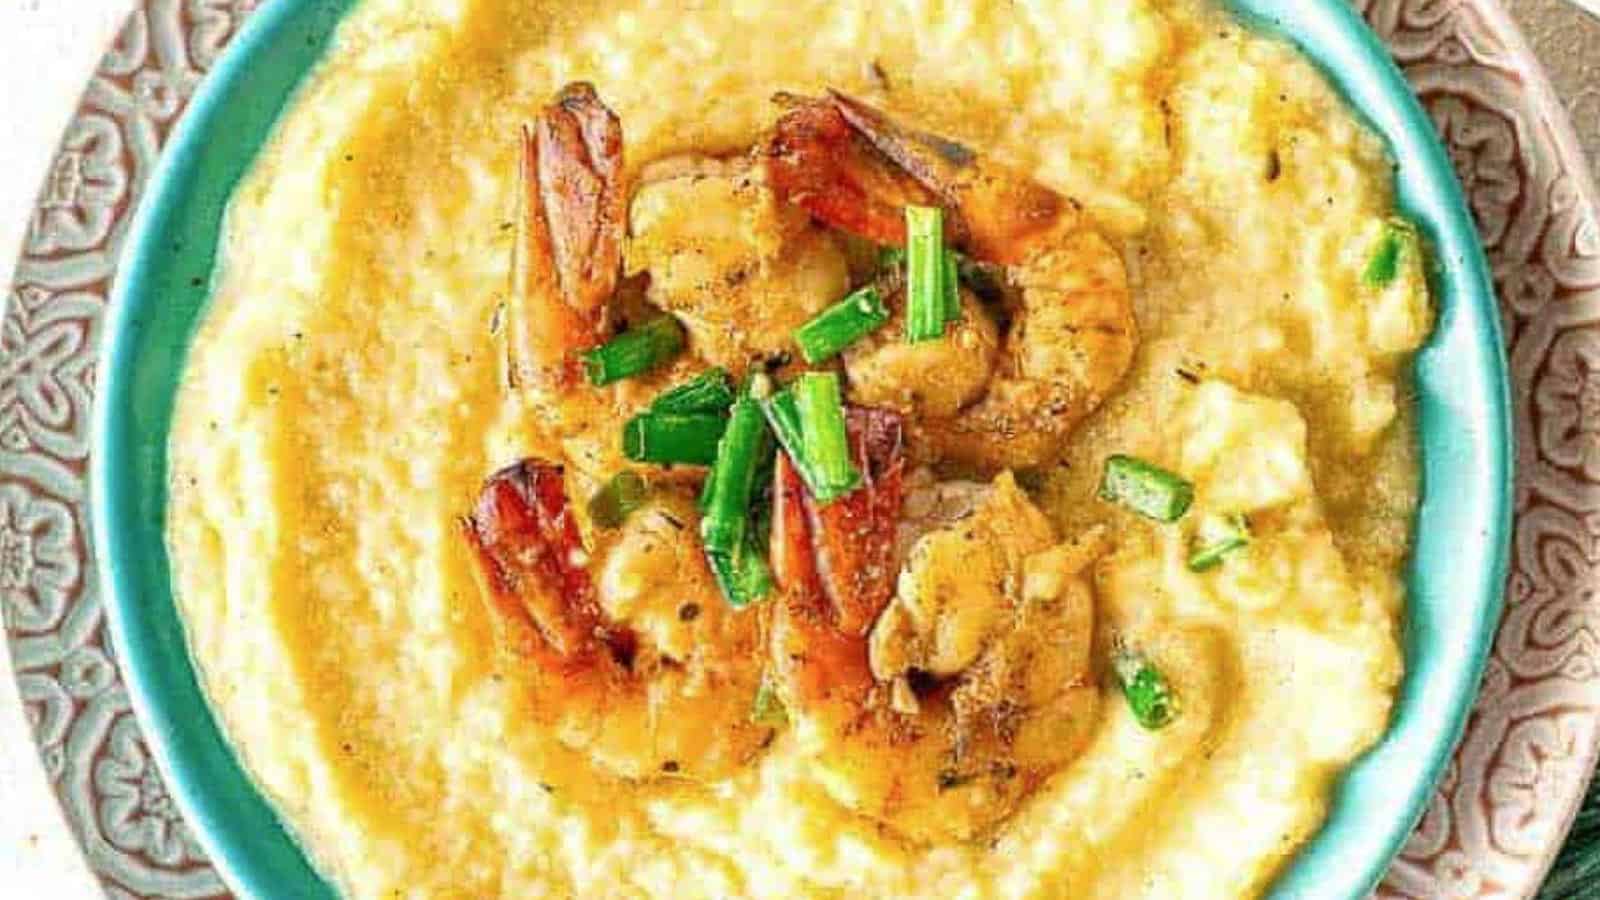 An overhead shot of a bowl of grits with shrimp on top.